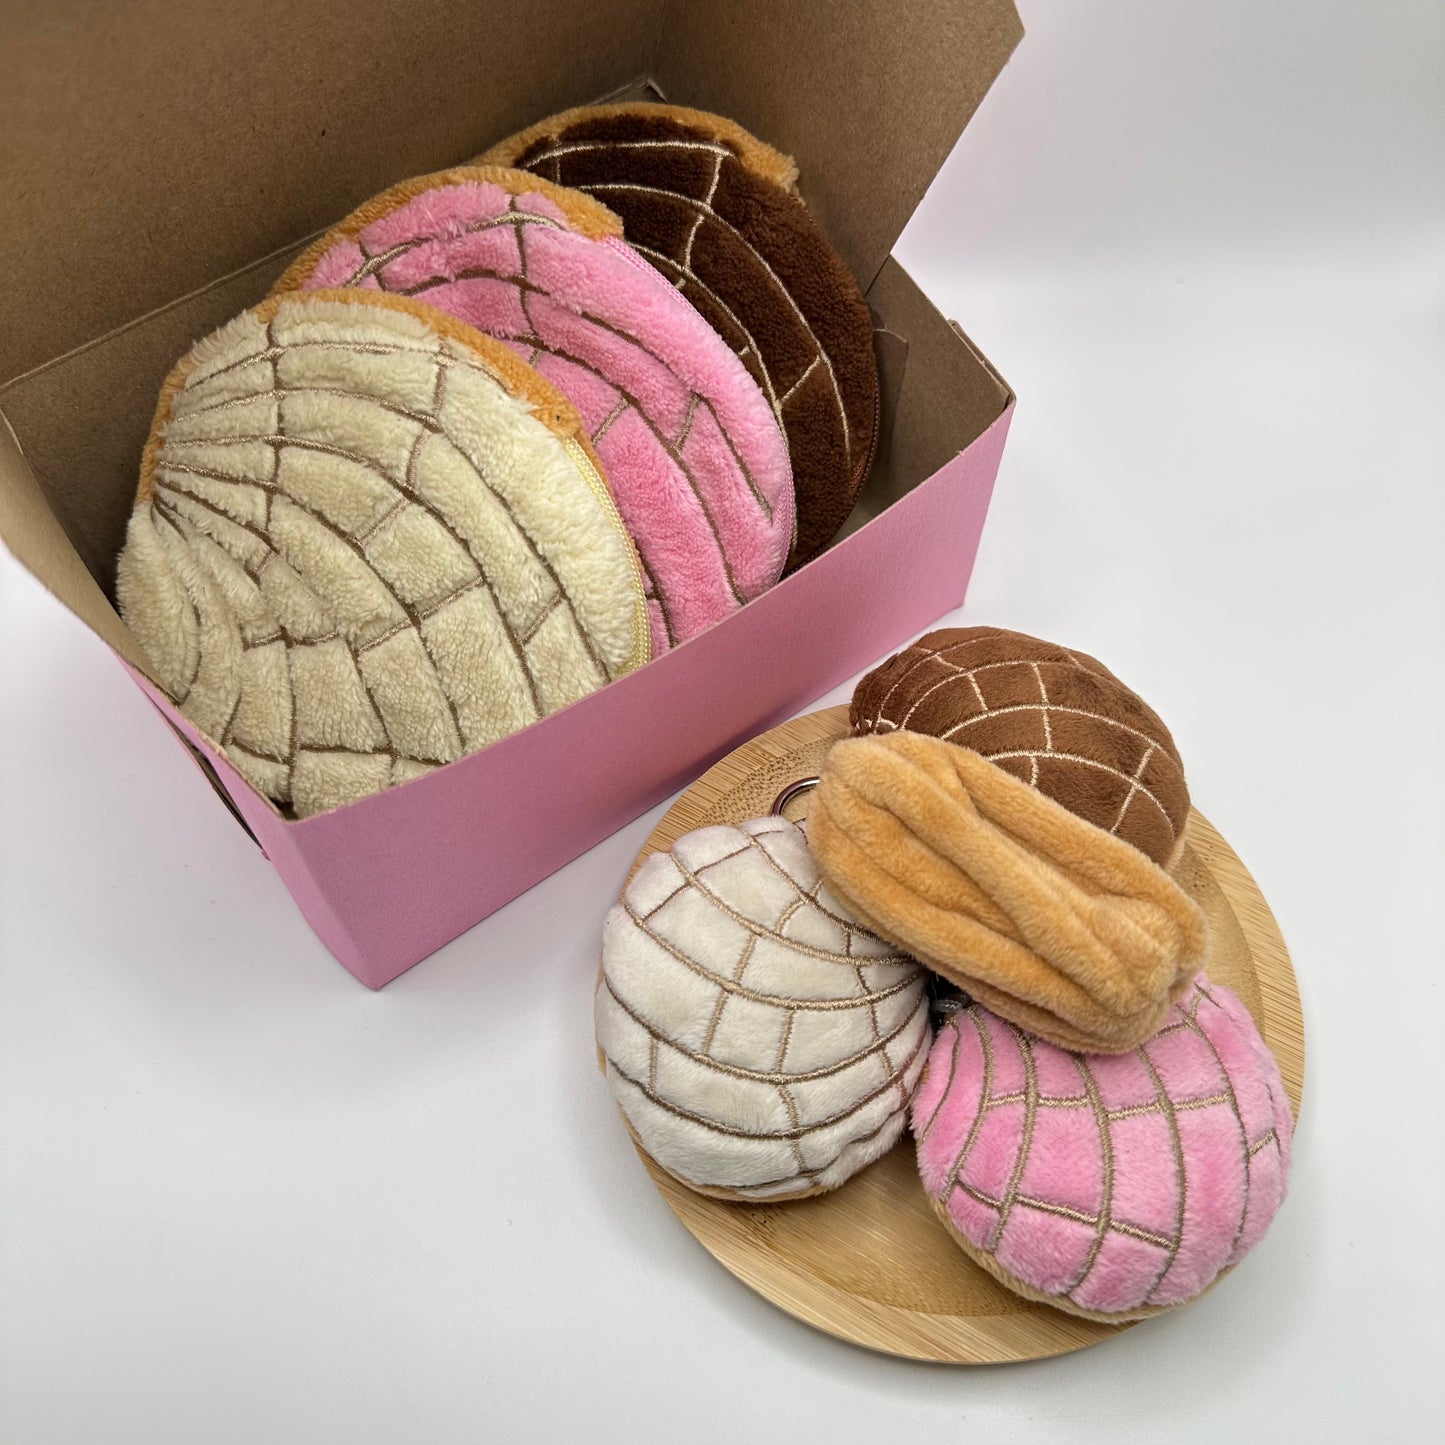 Mexican pastries in the form of pouches and keychains displayed in a pink pastry box and plate.